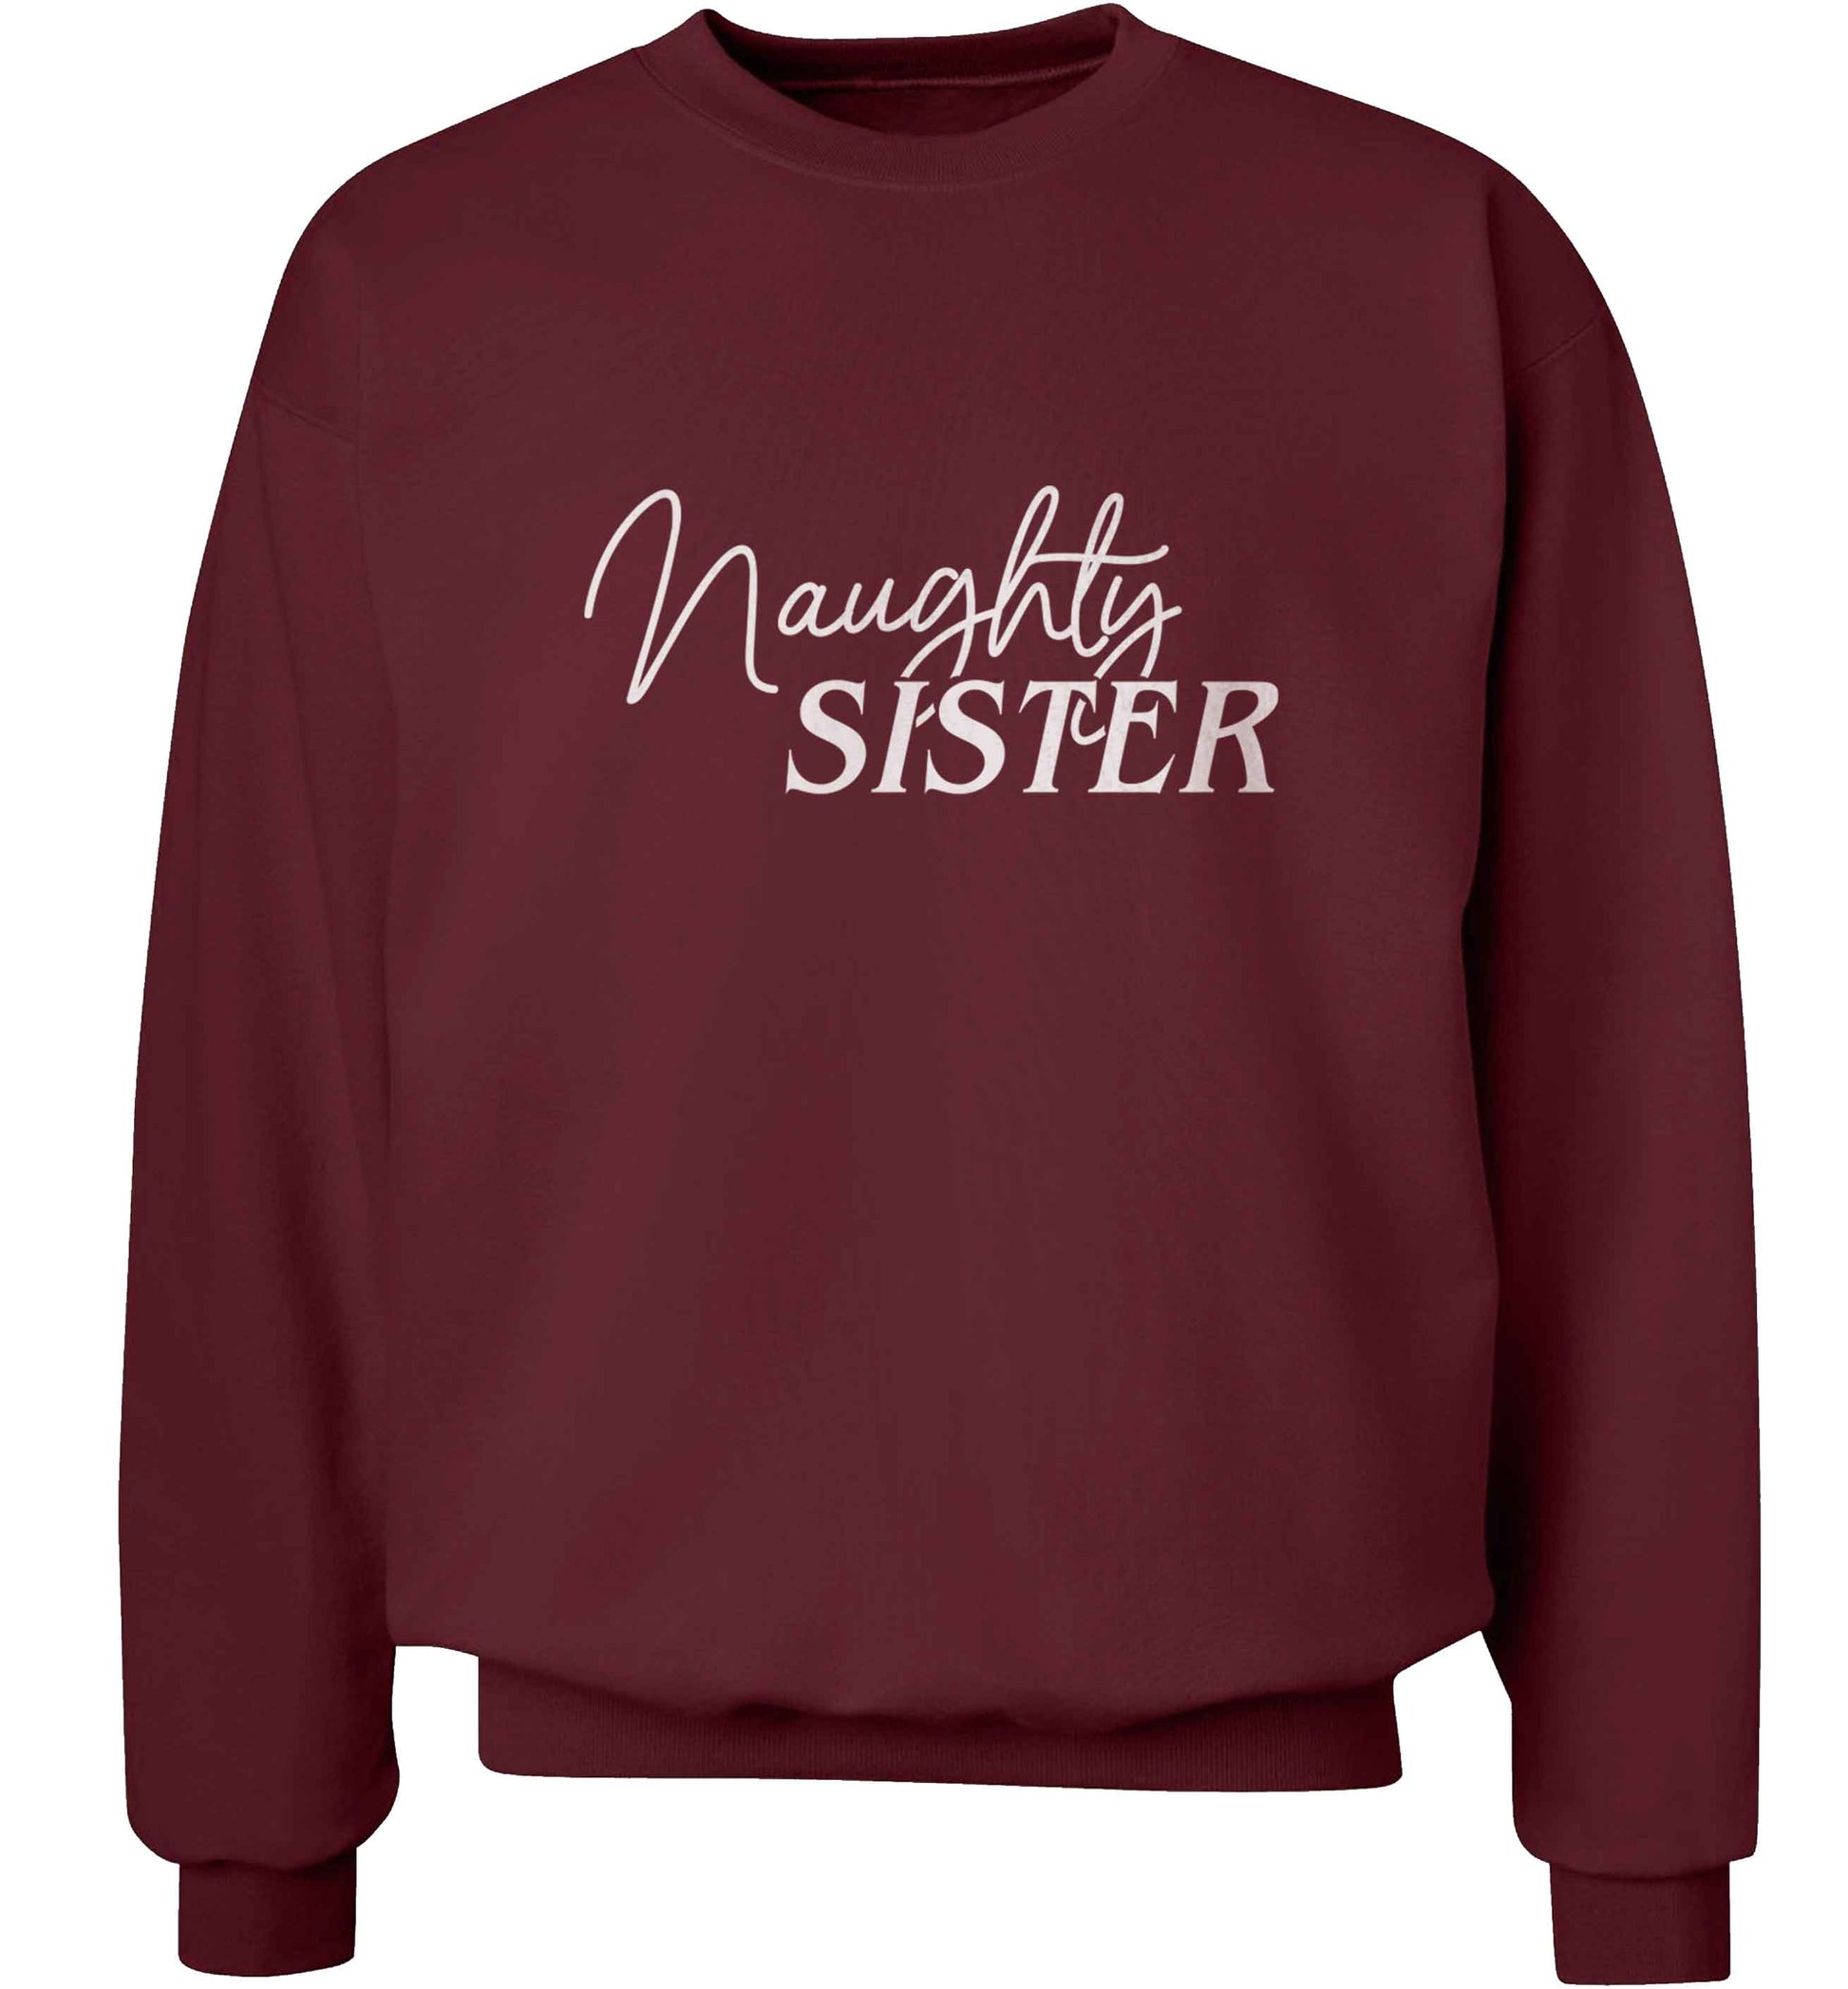 Naughty Sister adult's unisex maroon sweater 2XL